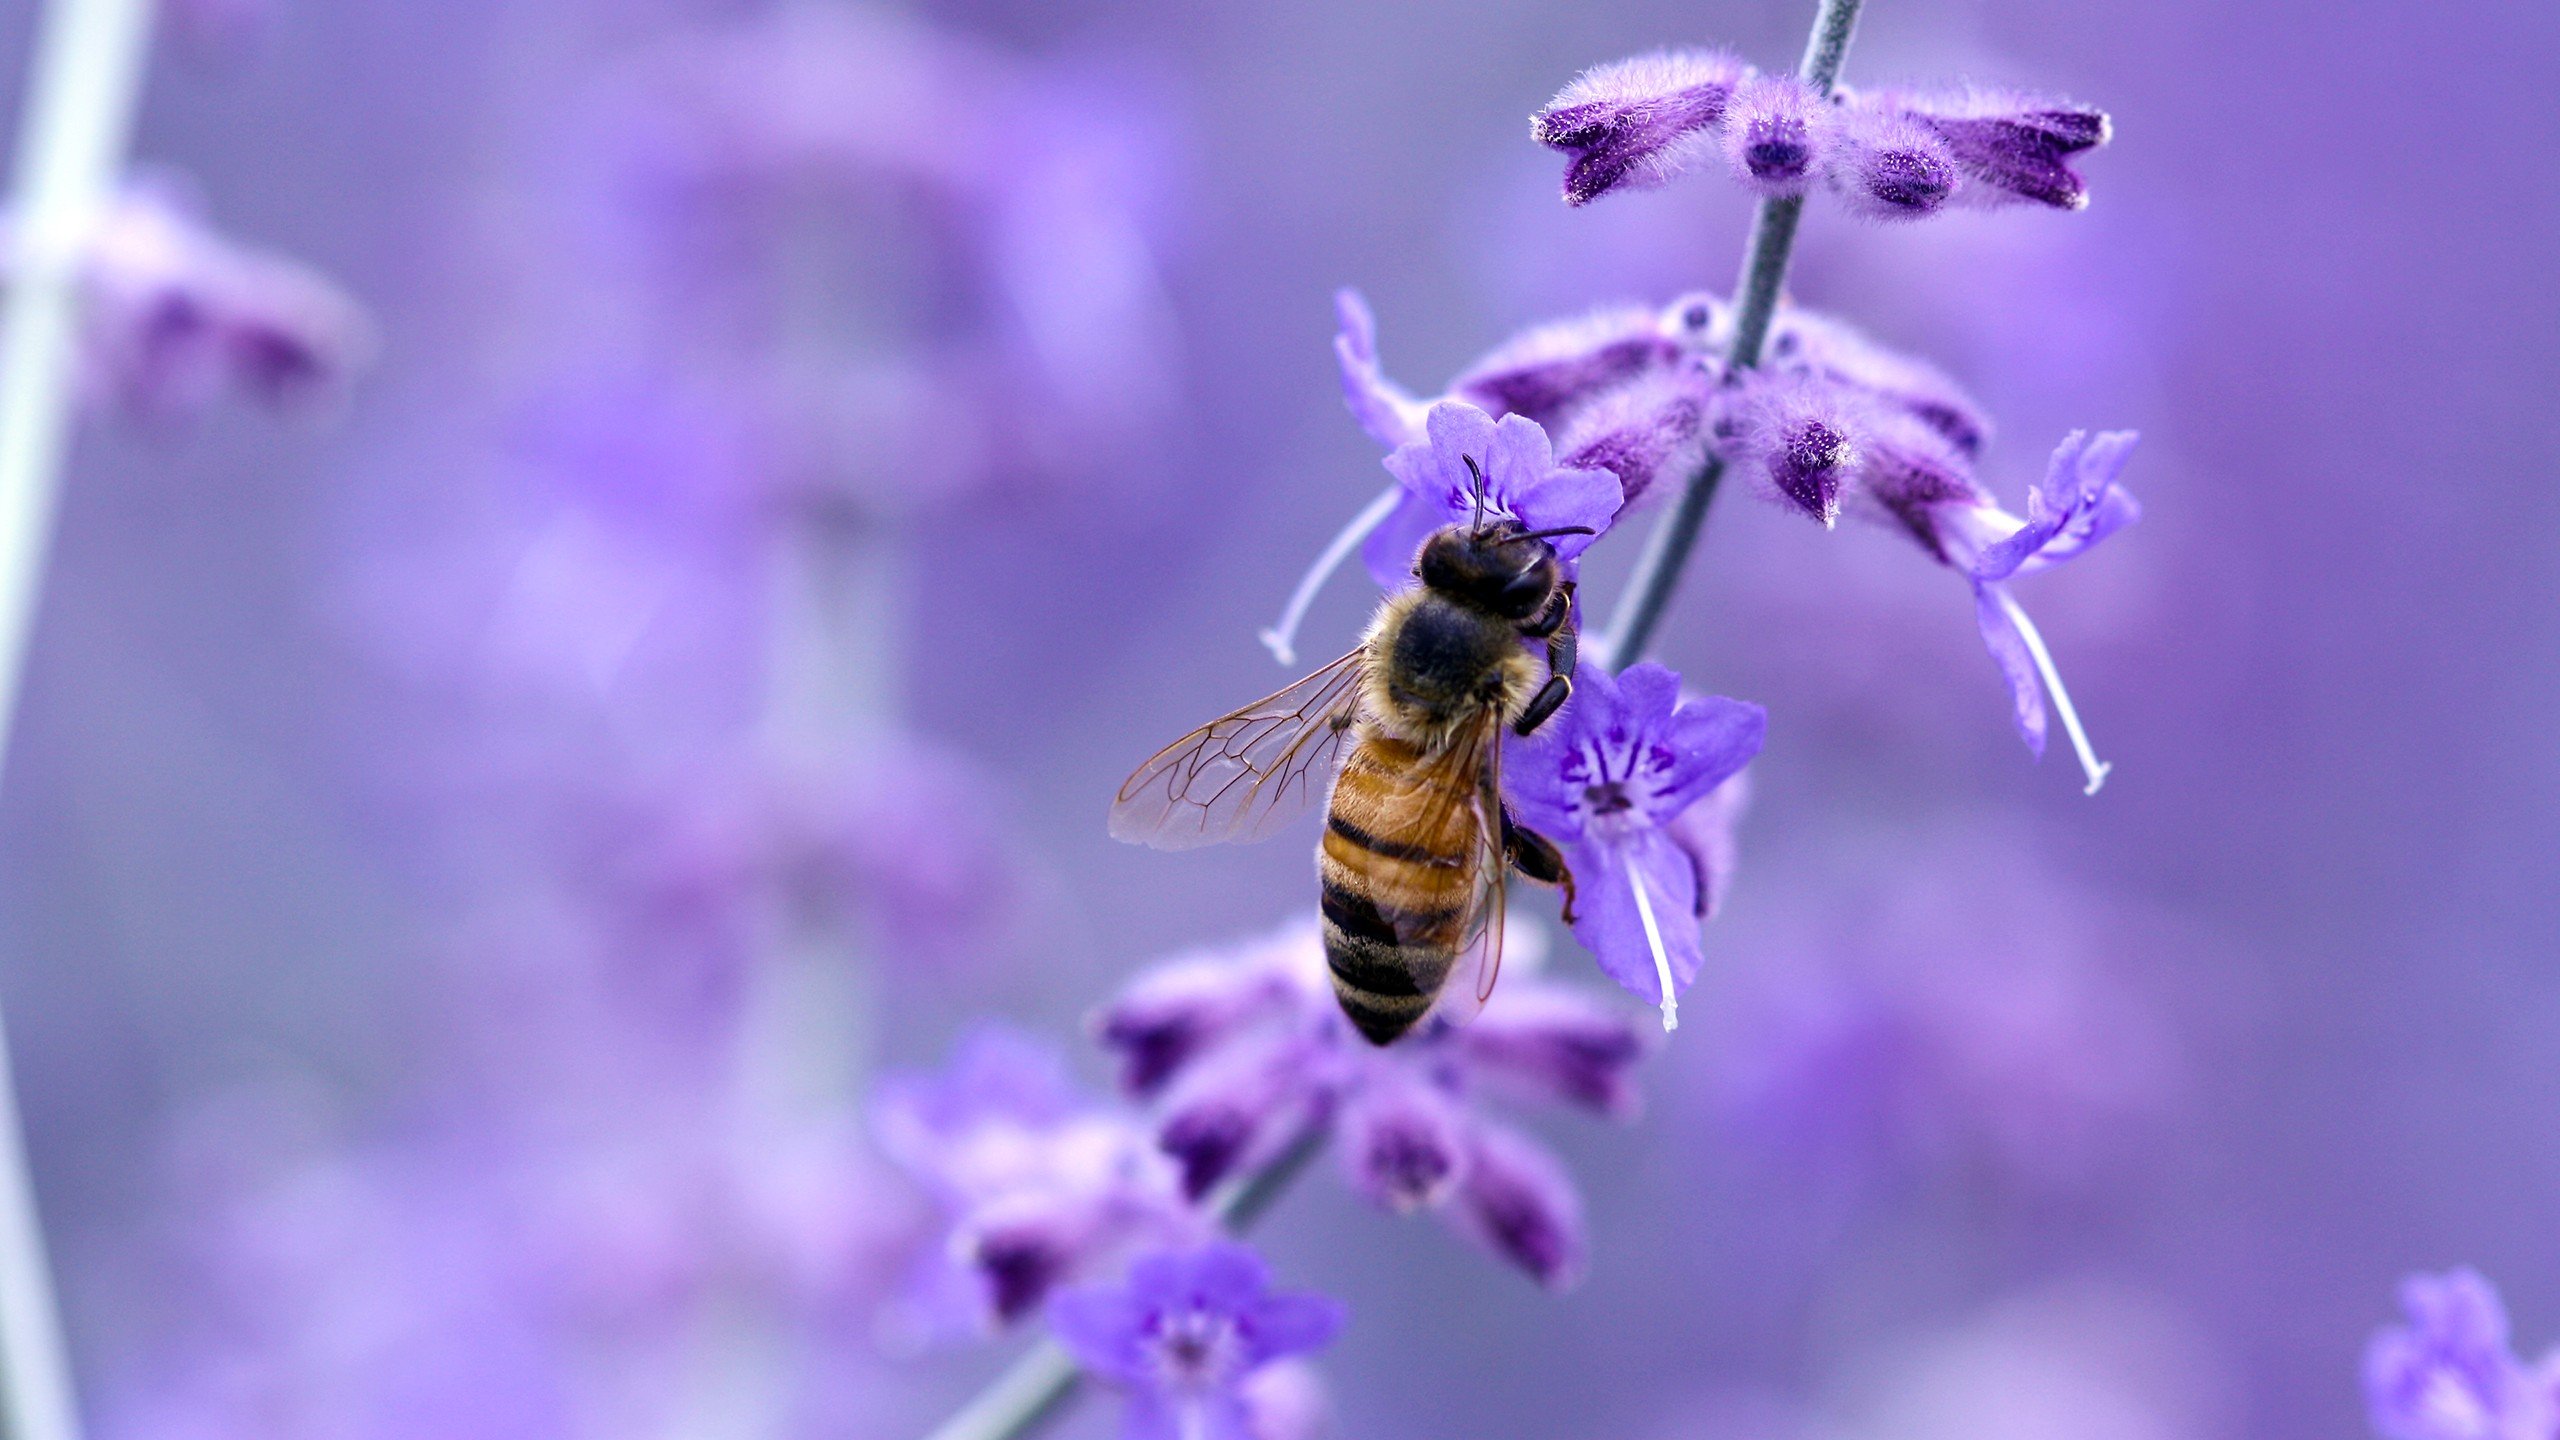 close up, Nature, Flowers, Insects, Purple, Macro, Bees Wallpaper